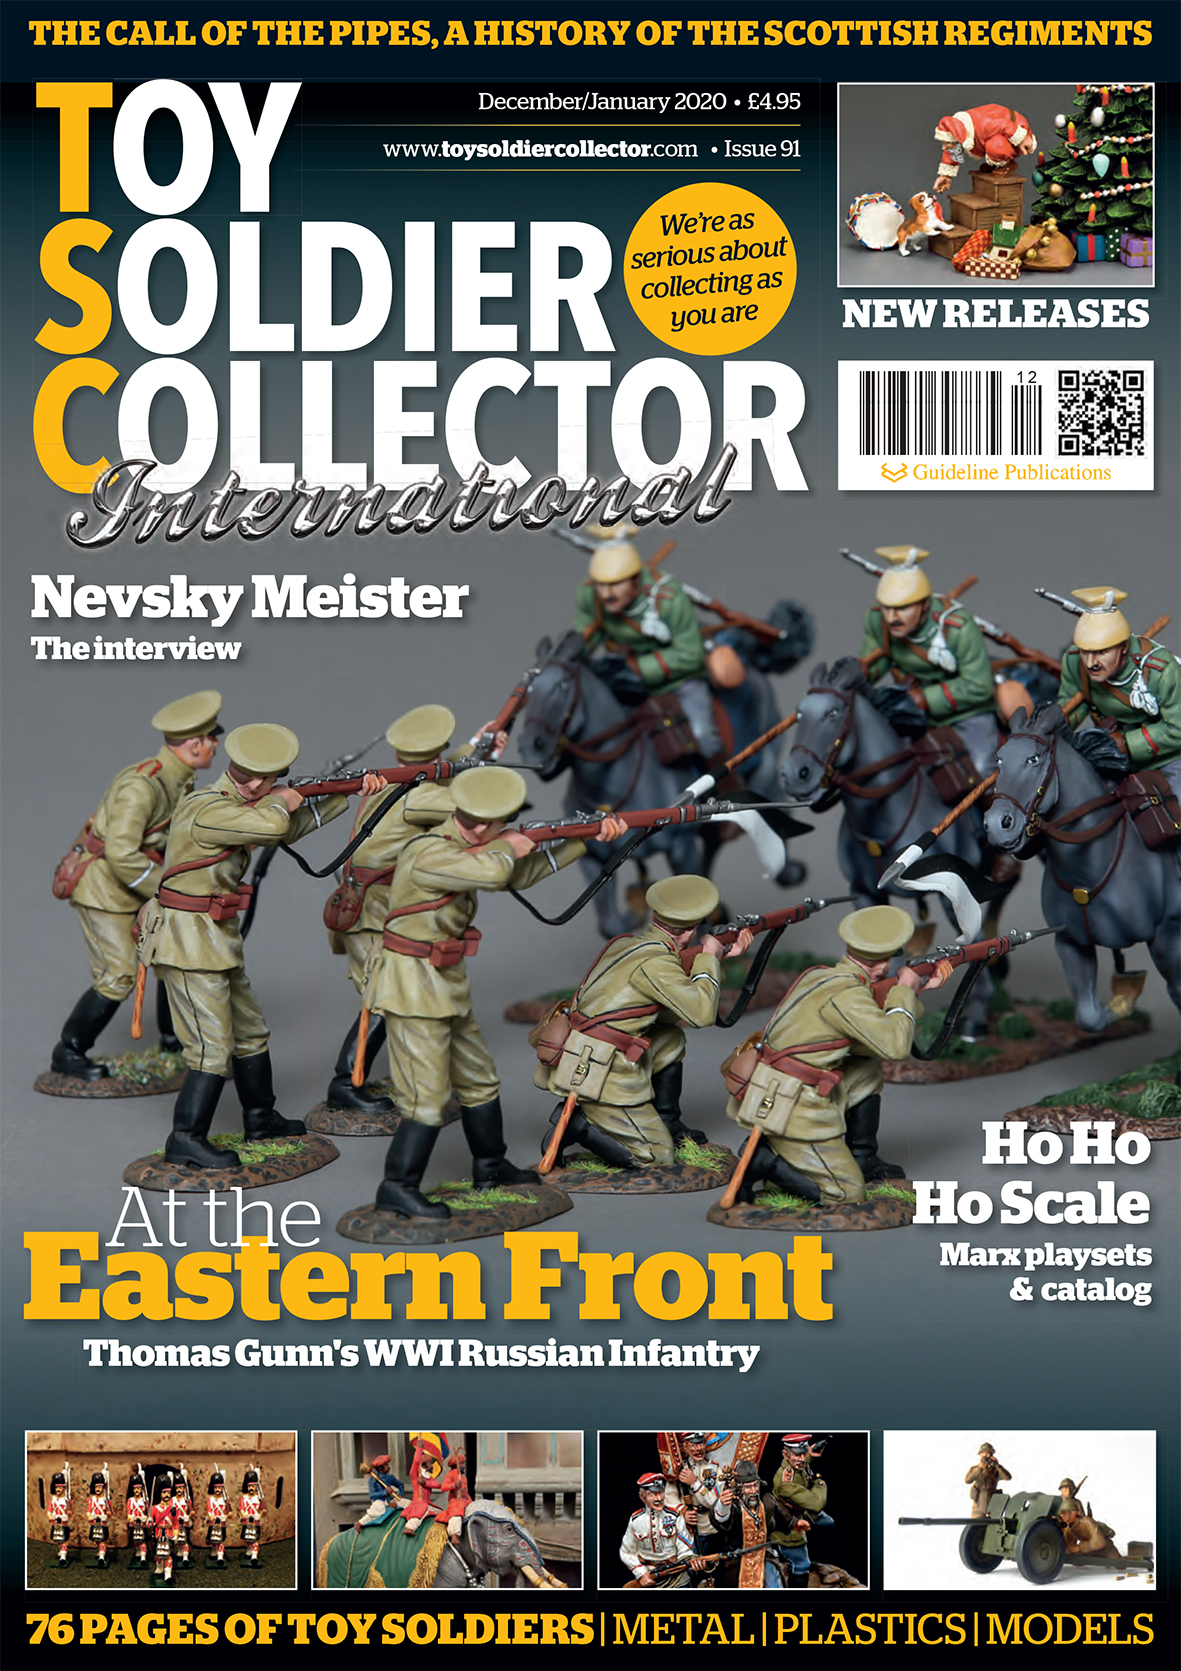 Guideline Publications Toy Soldier Collector #91 Dec/Jan Issue 91 